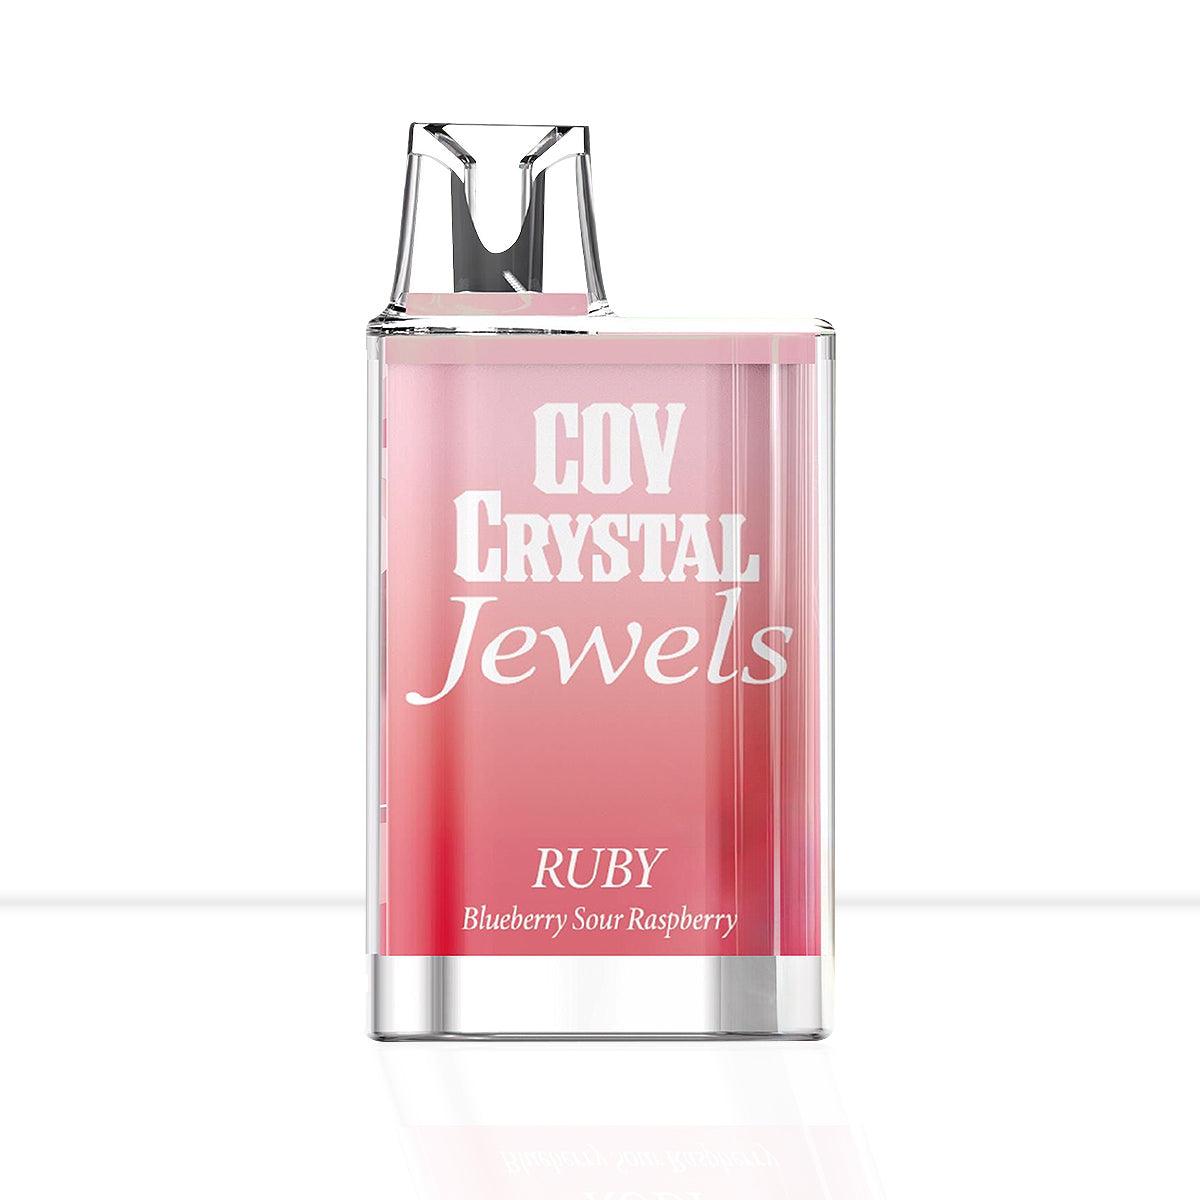 COV Crystal Jewels Blueberry Sour Raspberry Ruby Disposable - Vape Kits